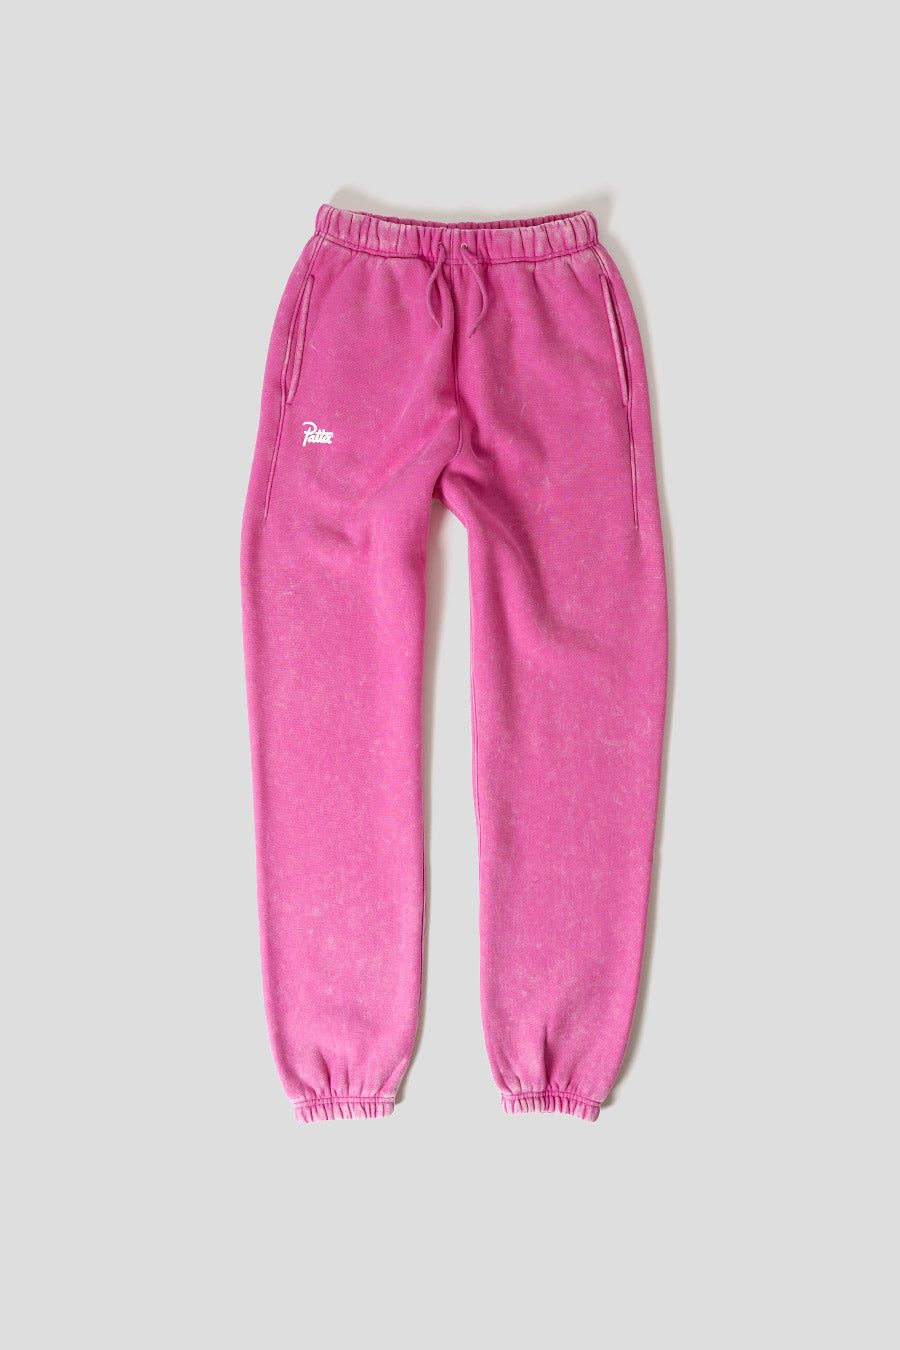 Patta - CLASSIC WASHED PINK SWEATPANTS - LE LABO STORE